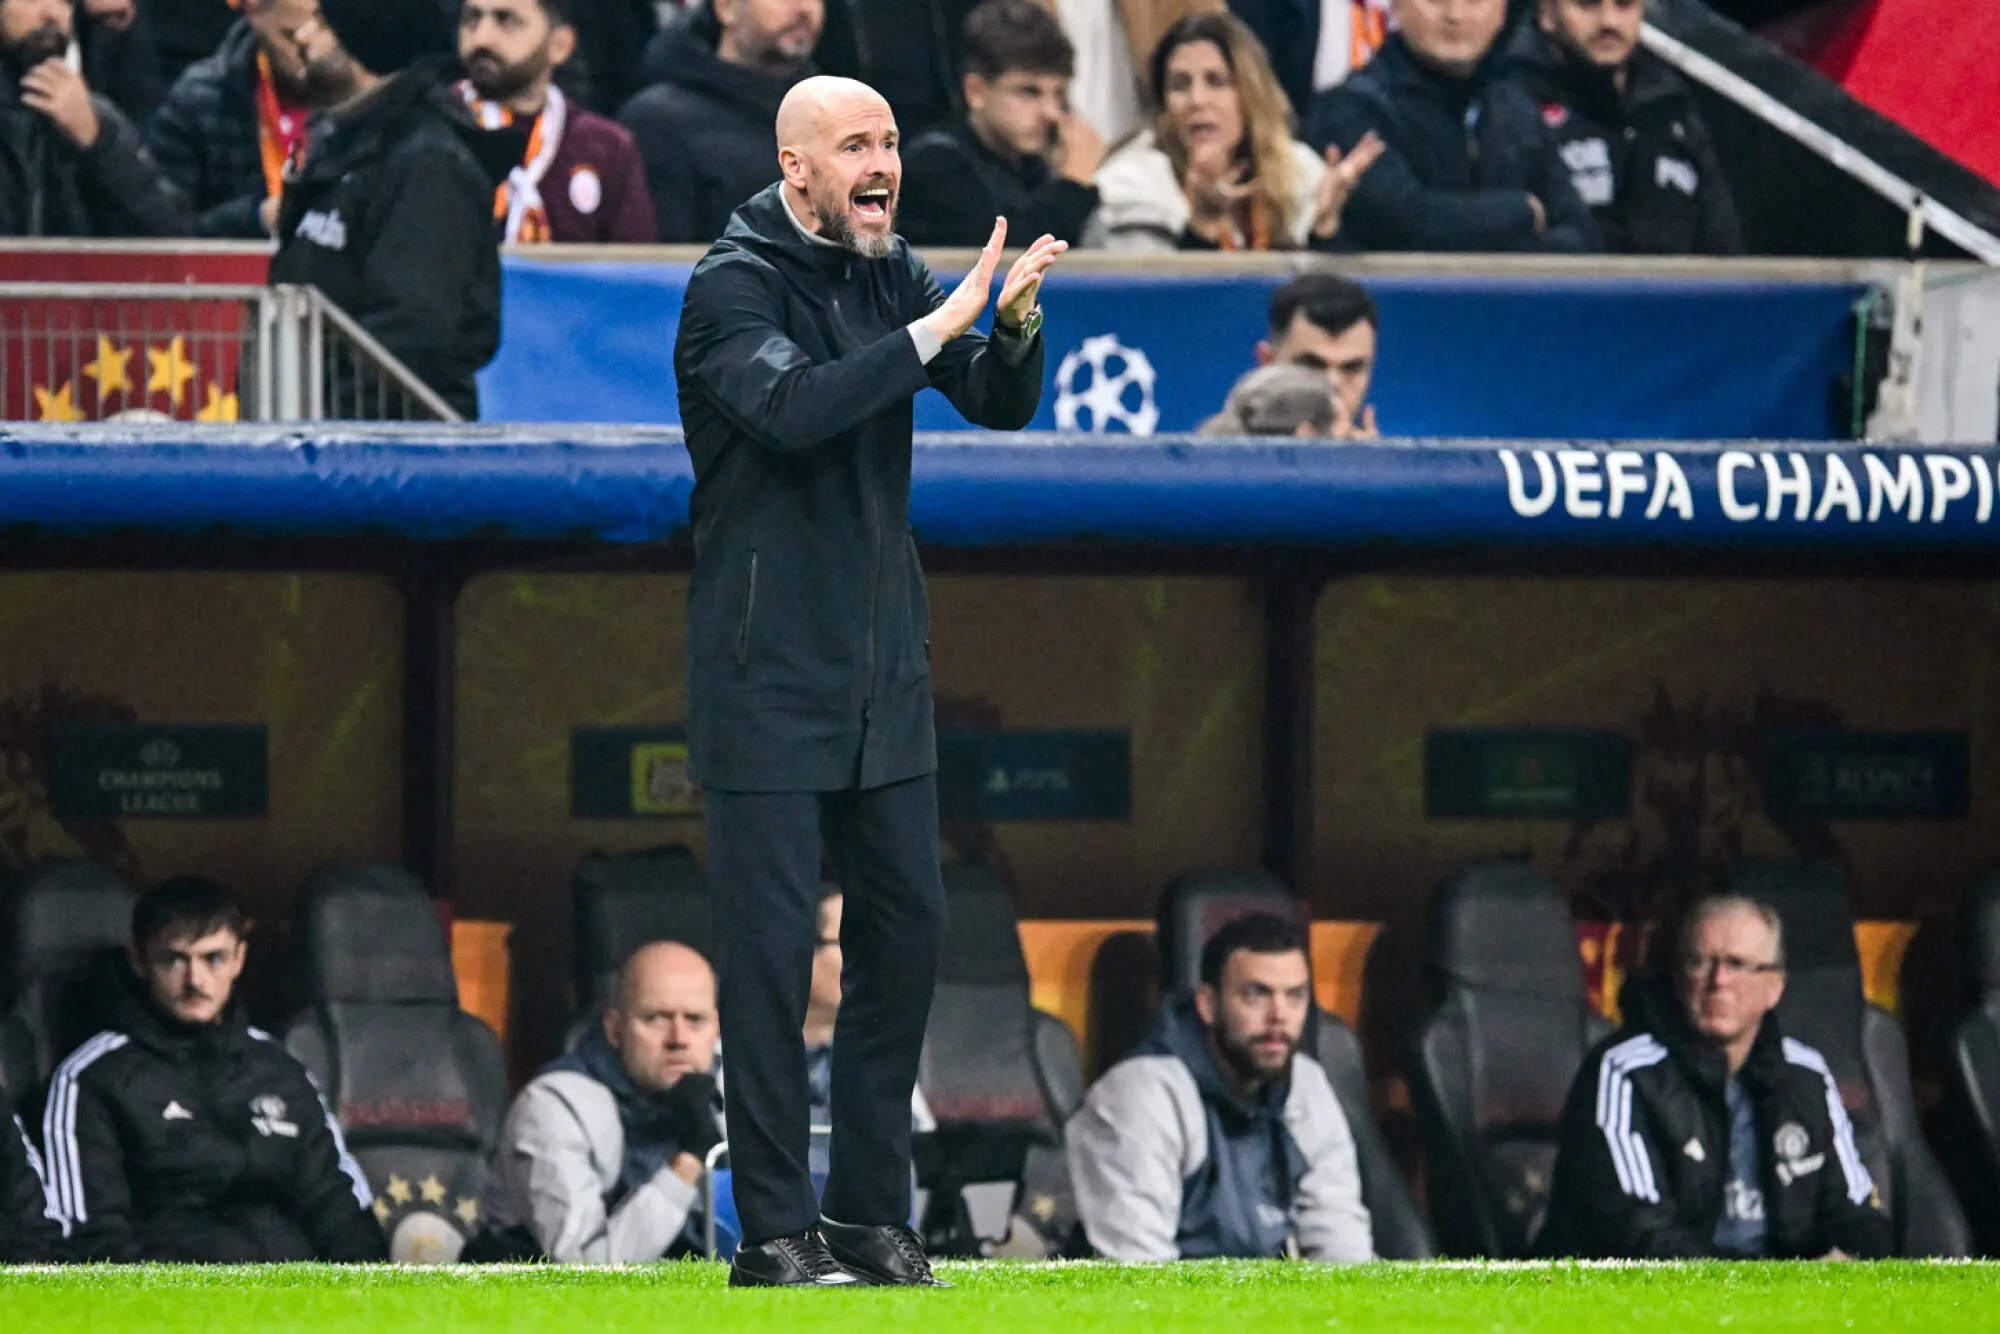 ISTANBUL - Manchester United FC coach Erik ten Hag during the UEFA Champions League group A match between Galatasaray SK and Manchester United FC at the Ali Sami Yen Spor Kompleksi stadium on November 29 in Istanbul, Turkey. ANP | Hollandse Hoogte | GERRIT VAN COLOGNE - Photo by Icon sport